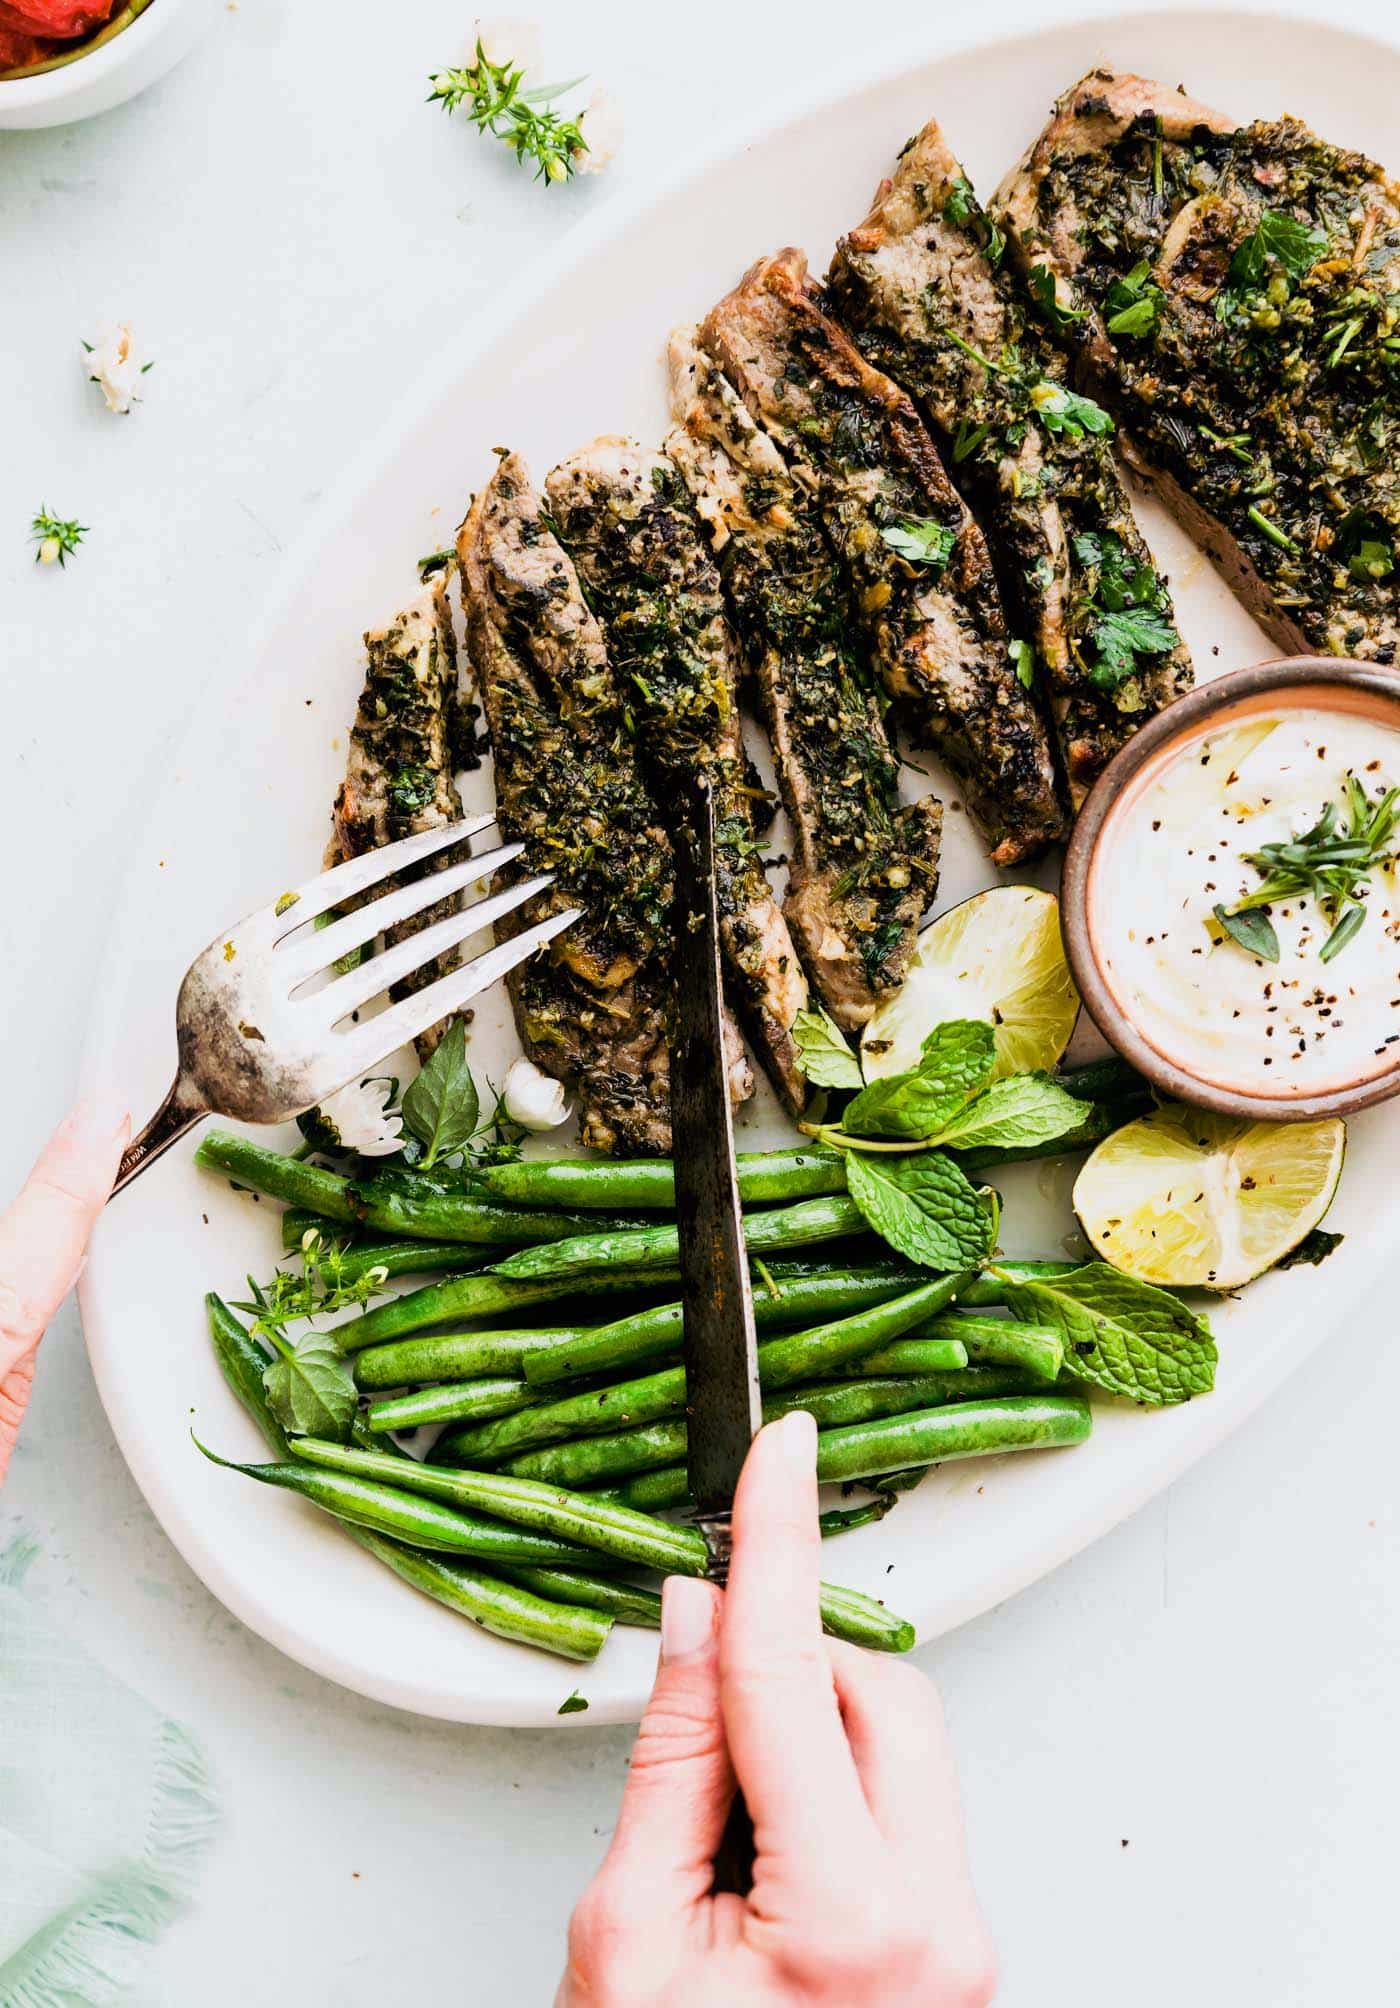 a white serving platter with broiled lamb chops with mint chimichurri sauce and green beans, lime wedges, and a white dipping sauce on the side with two hands holding a fork and a knife ready to cut into a lamb chop